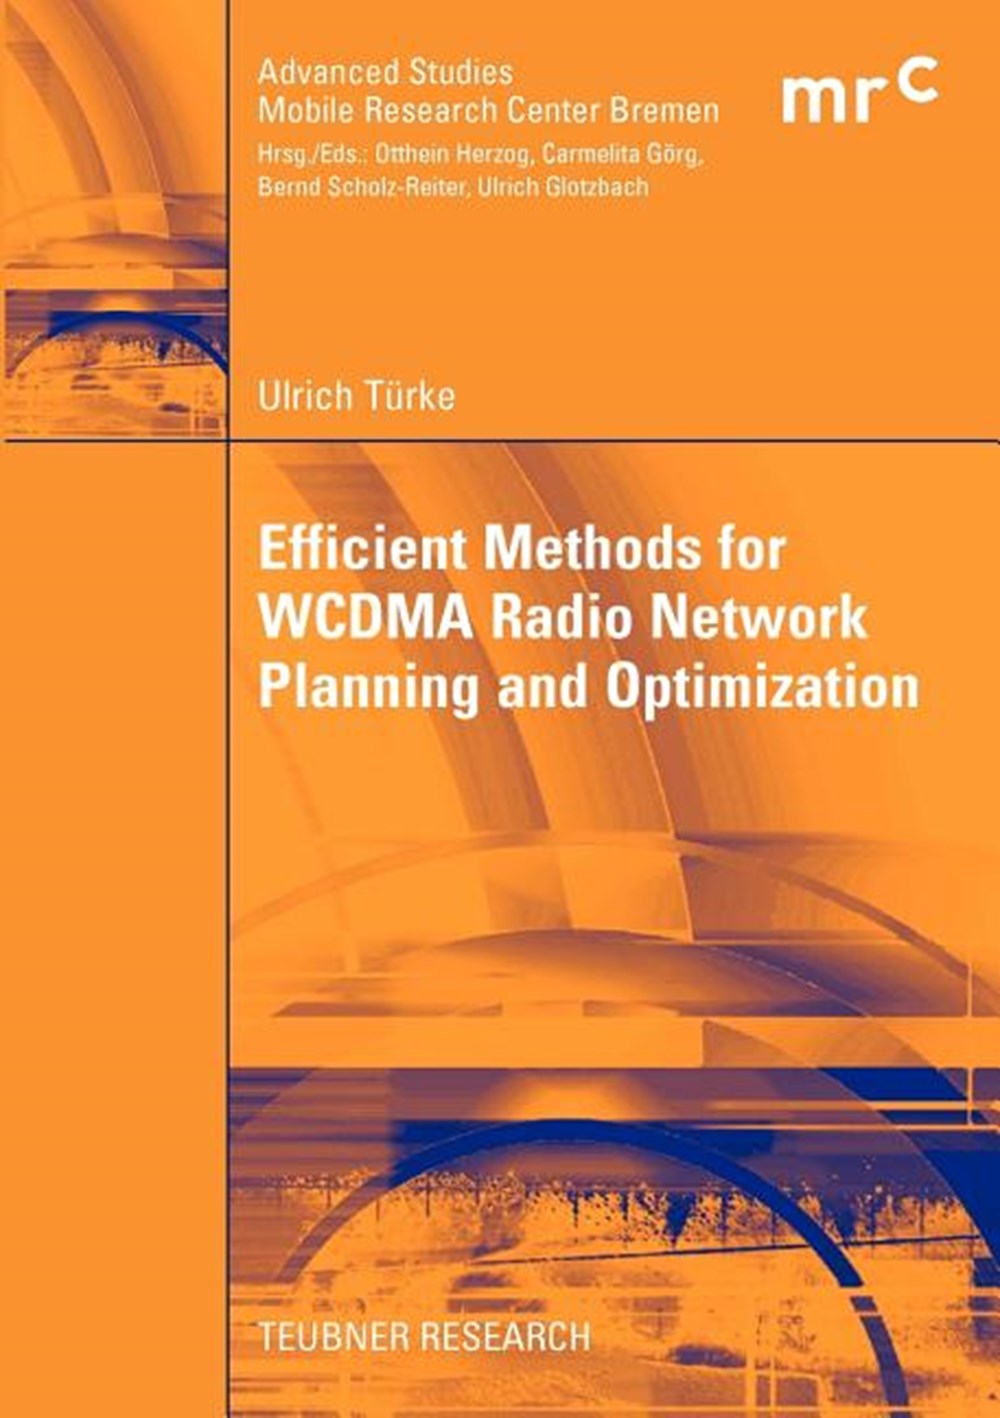 Efficient Methods for Wcdma Radio Network Planning and Optimization (2008)